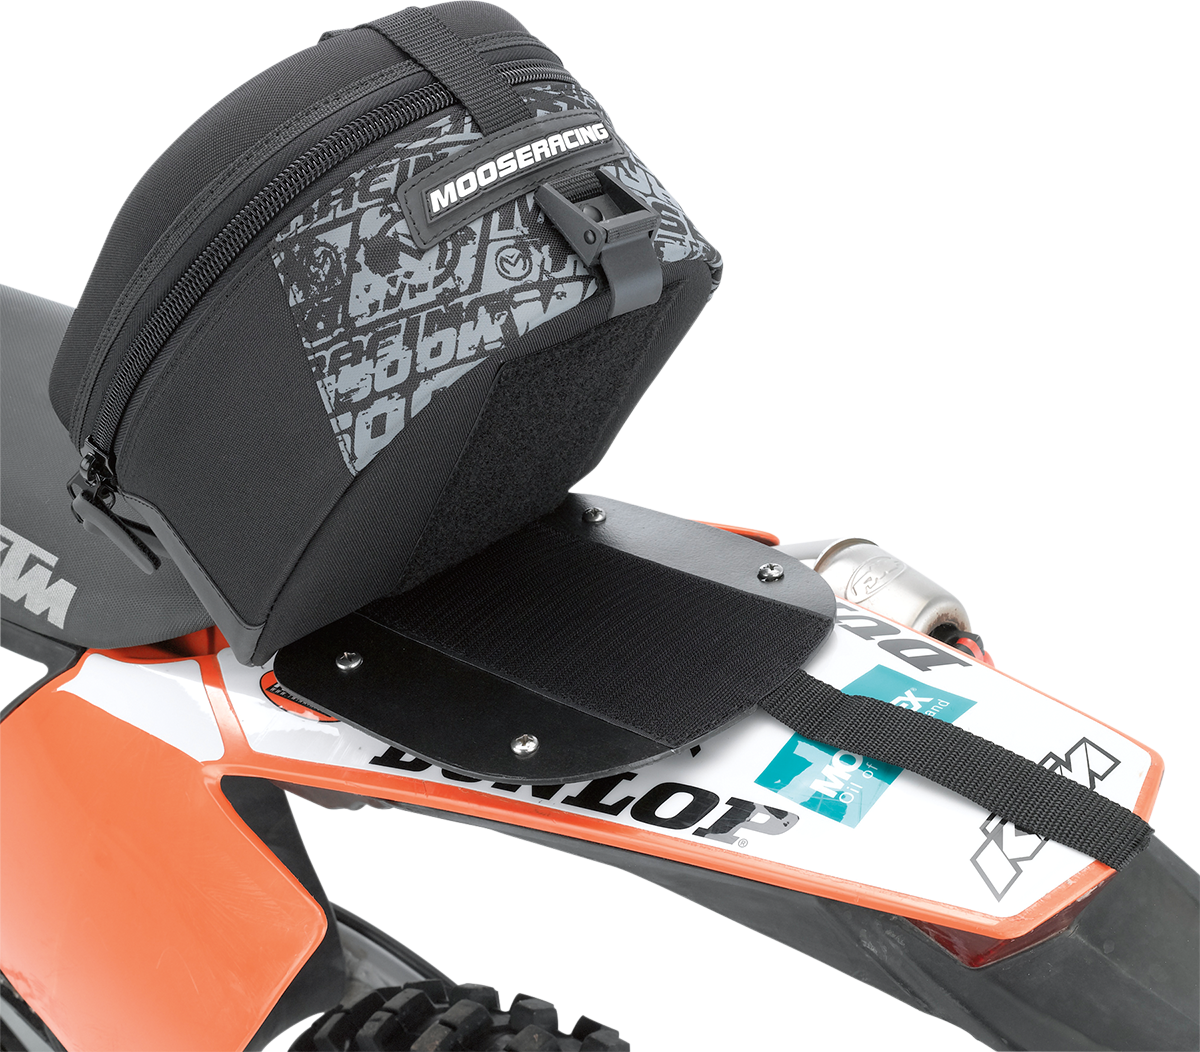 Main image of Moose Removable Rear Fender Pack